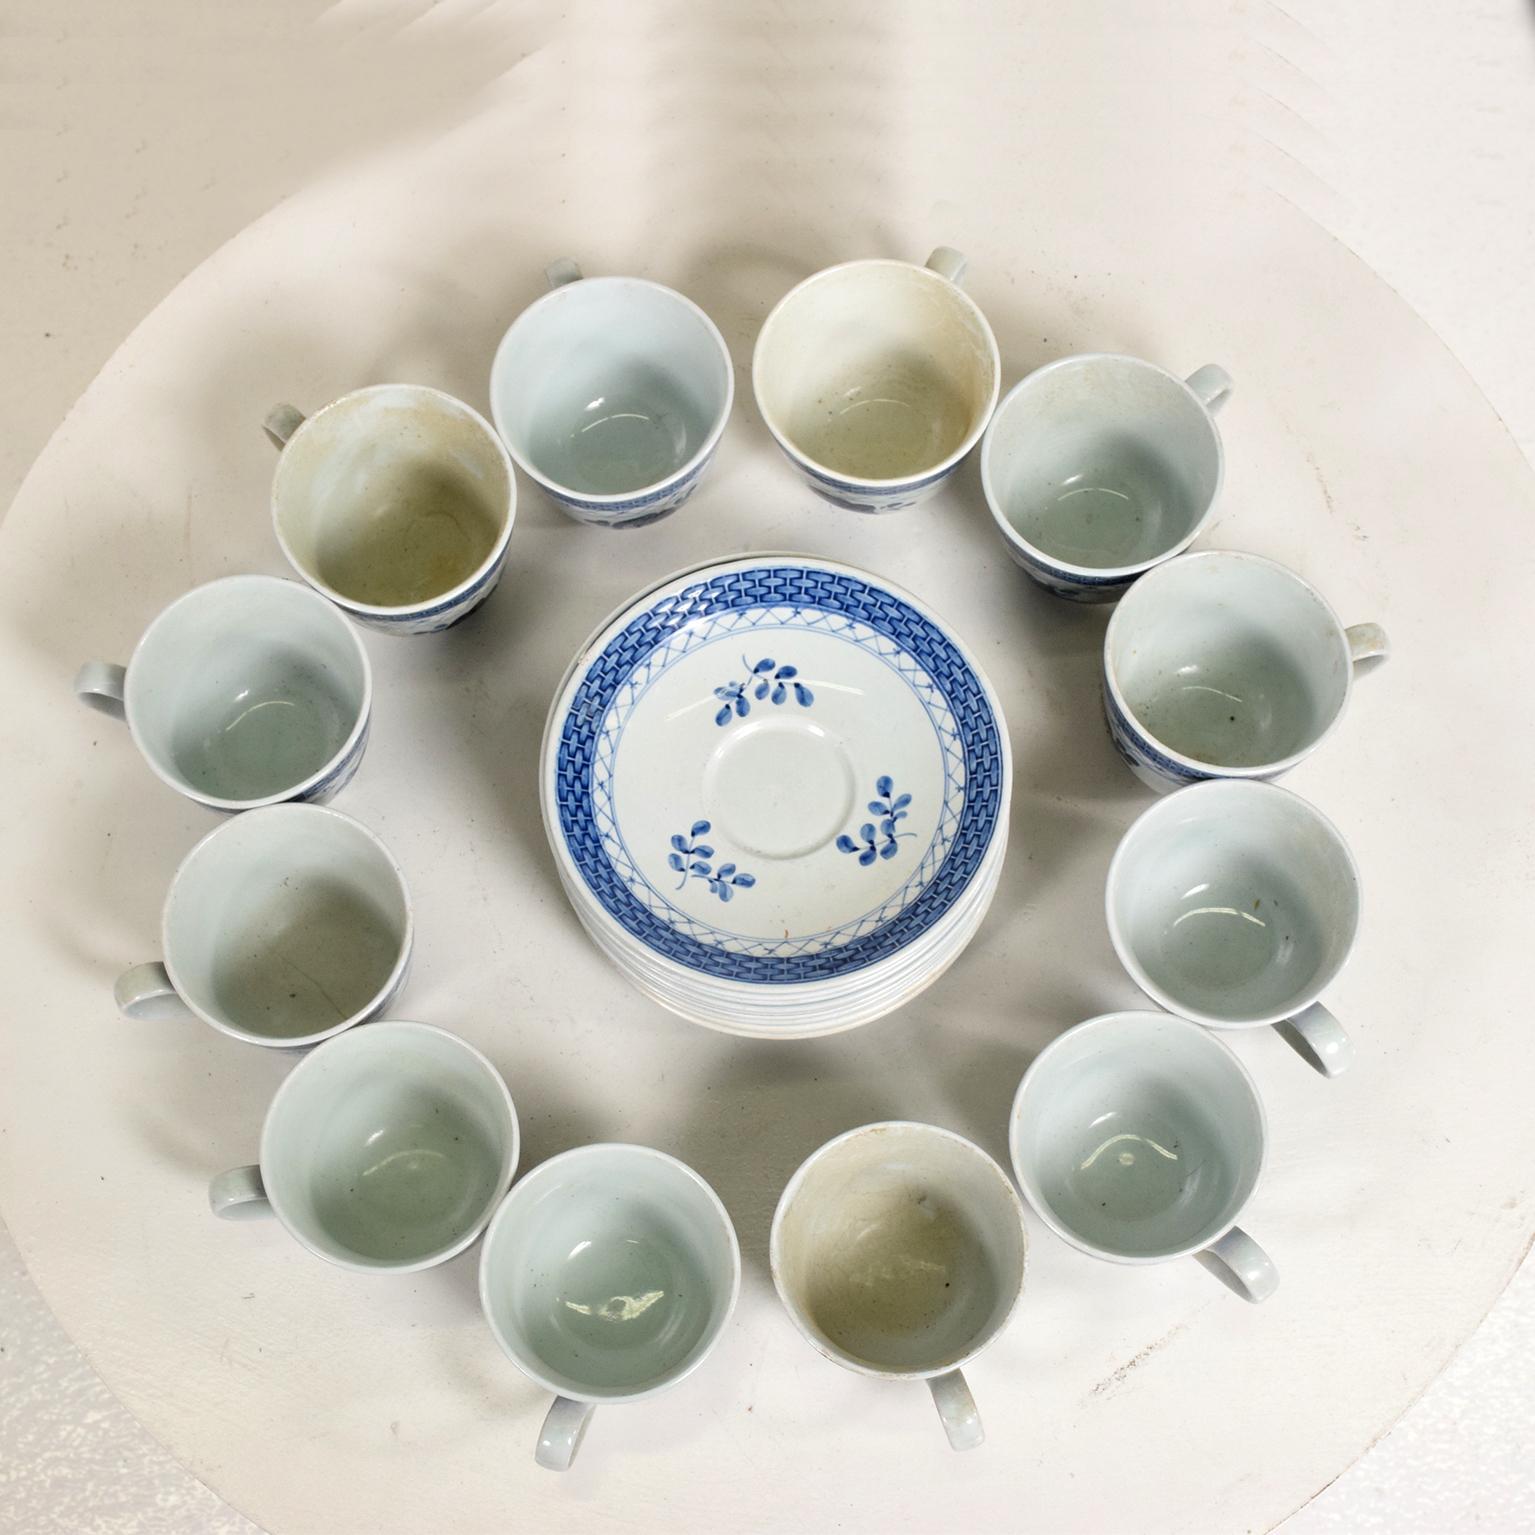 AMBIANIC offering:   
Danish Modern Coffee Tea Cup  Saucer Service Set for (12) Twelve. Delicately designed rim lattice band rose pattern in Tranquebar Blue and White Porcelain. Midcentury Modern 1960s.
Stamped underneath faded makers symbols.